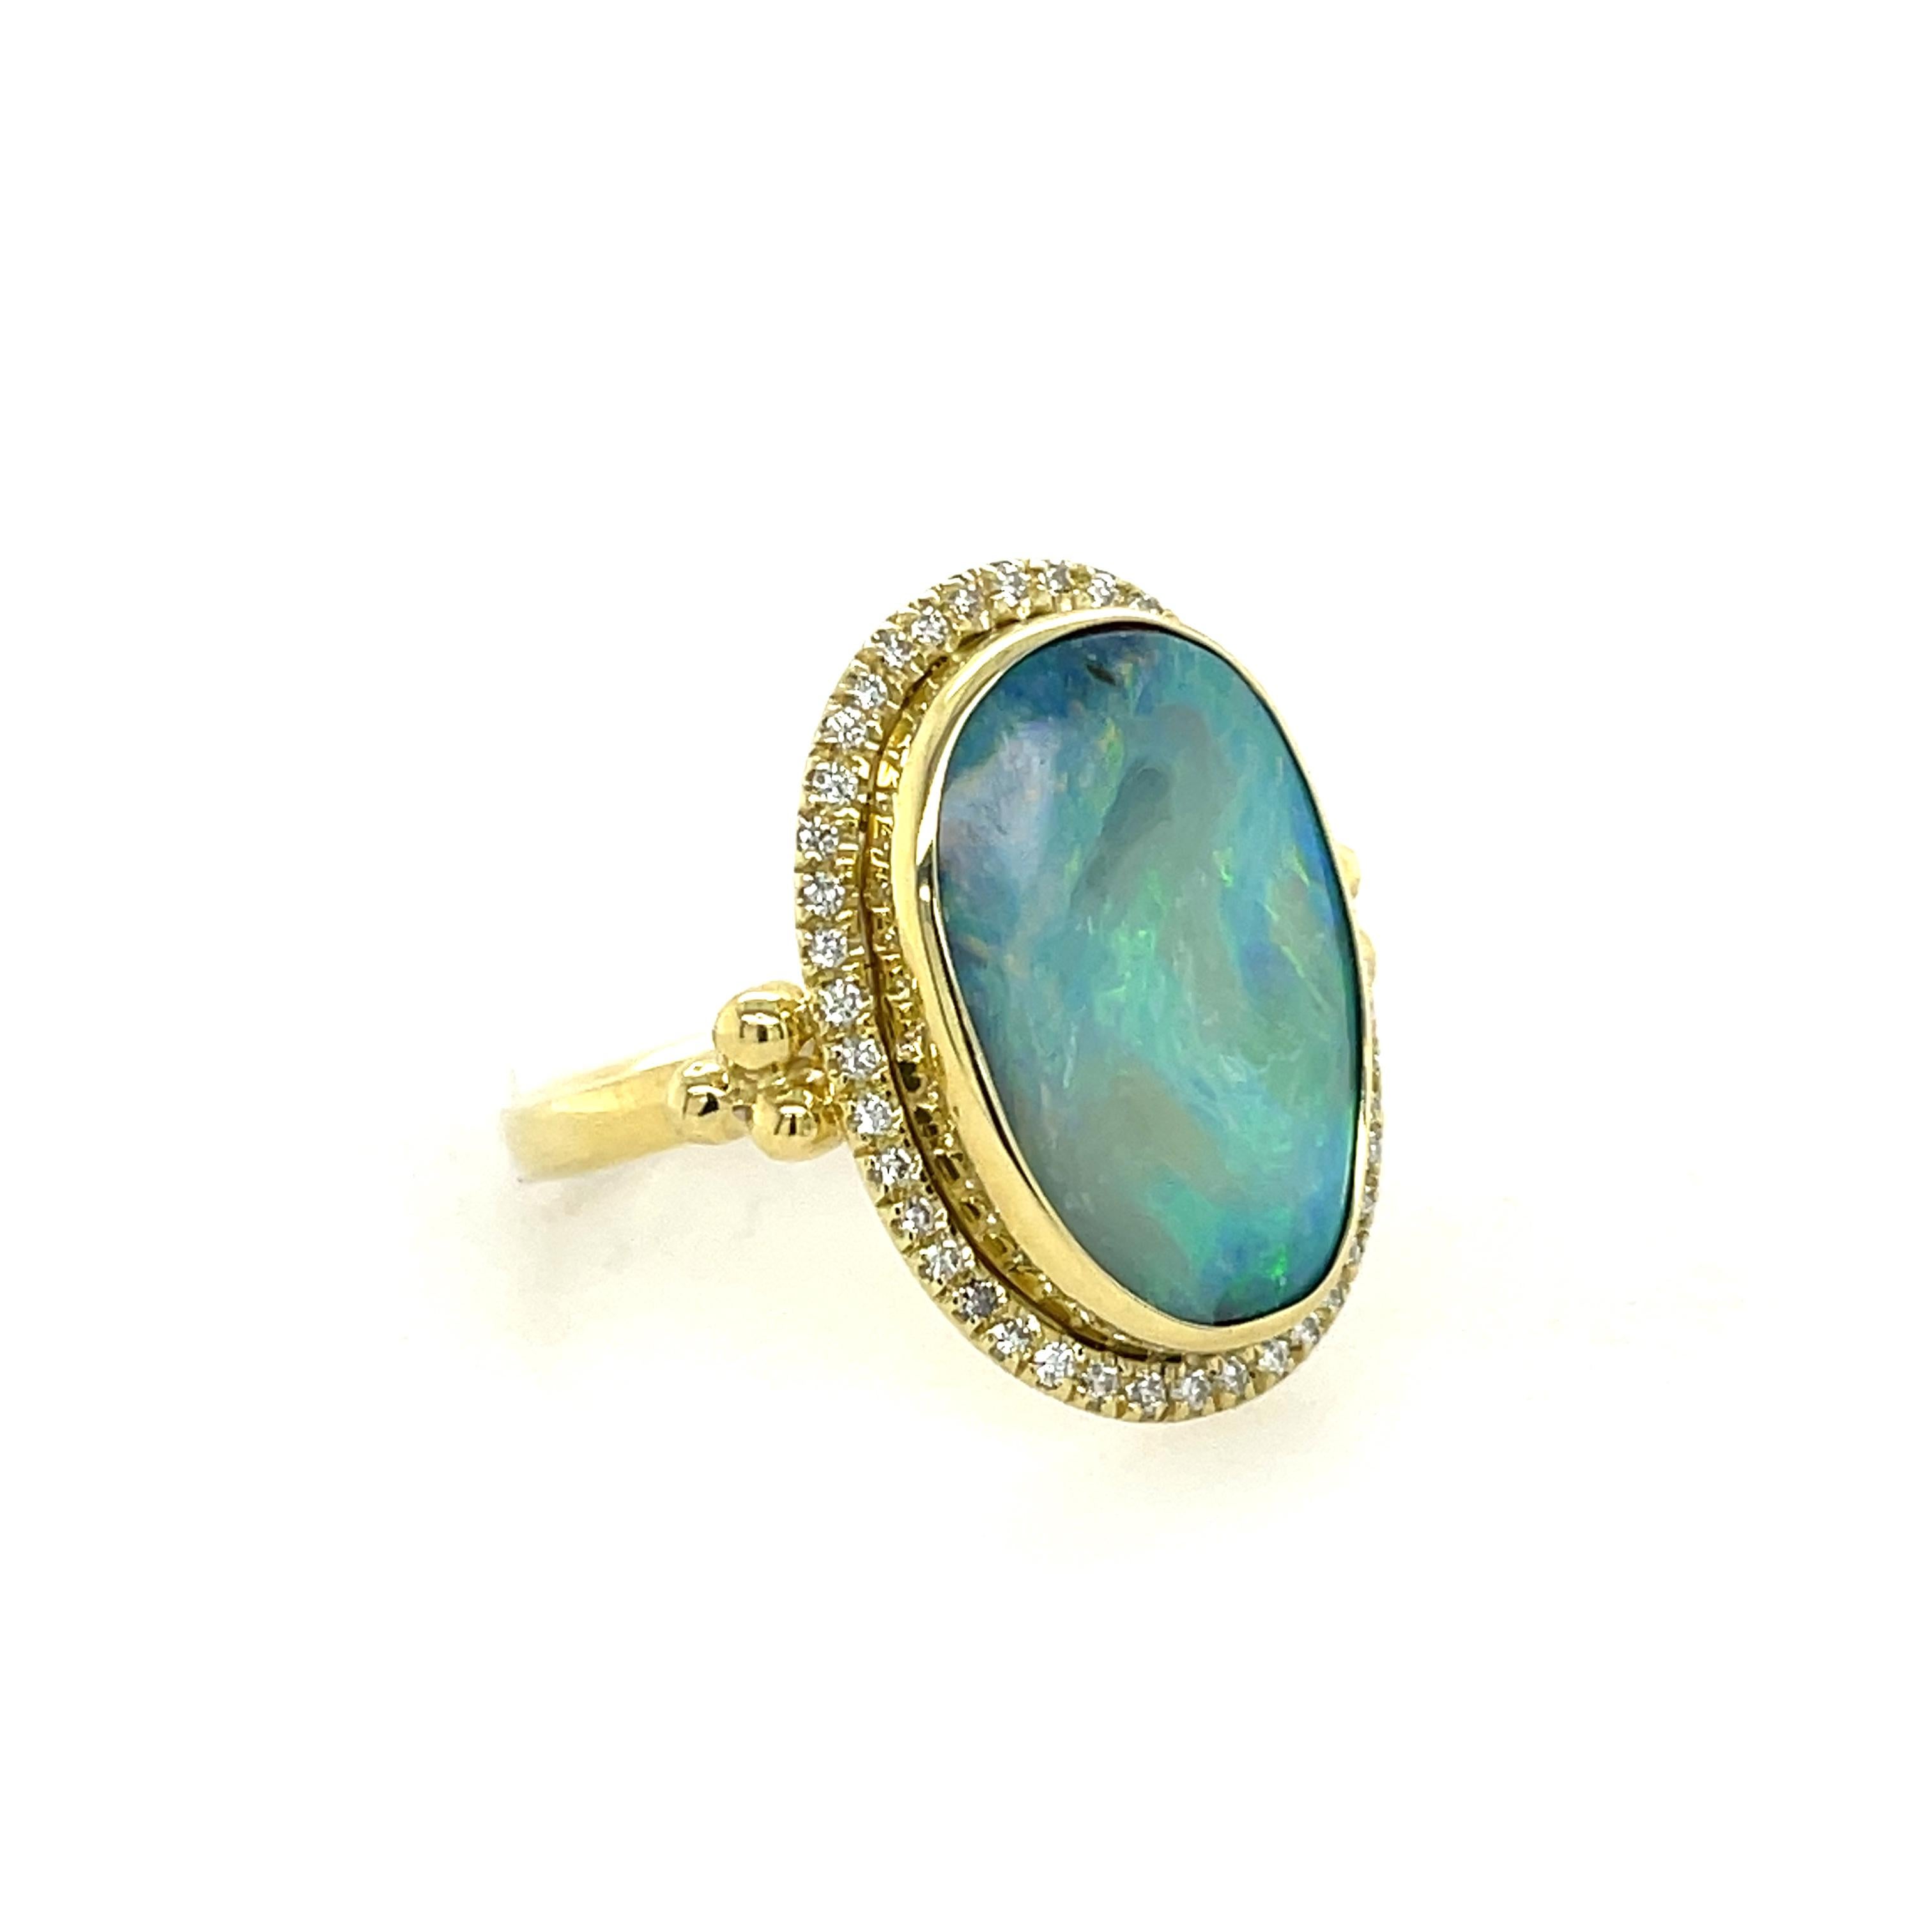 Mazza Opal & Diamond Ring In 18K Yellow Gold. The Ring Features A 8.10Ct Opal With A Halo Of 0.21Ctw Of Round Diamonds. Ring Size 7.